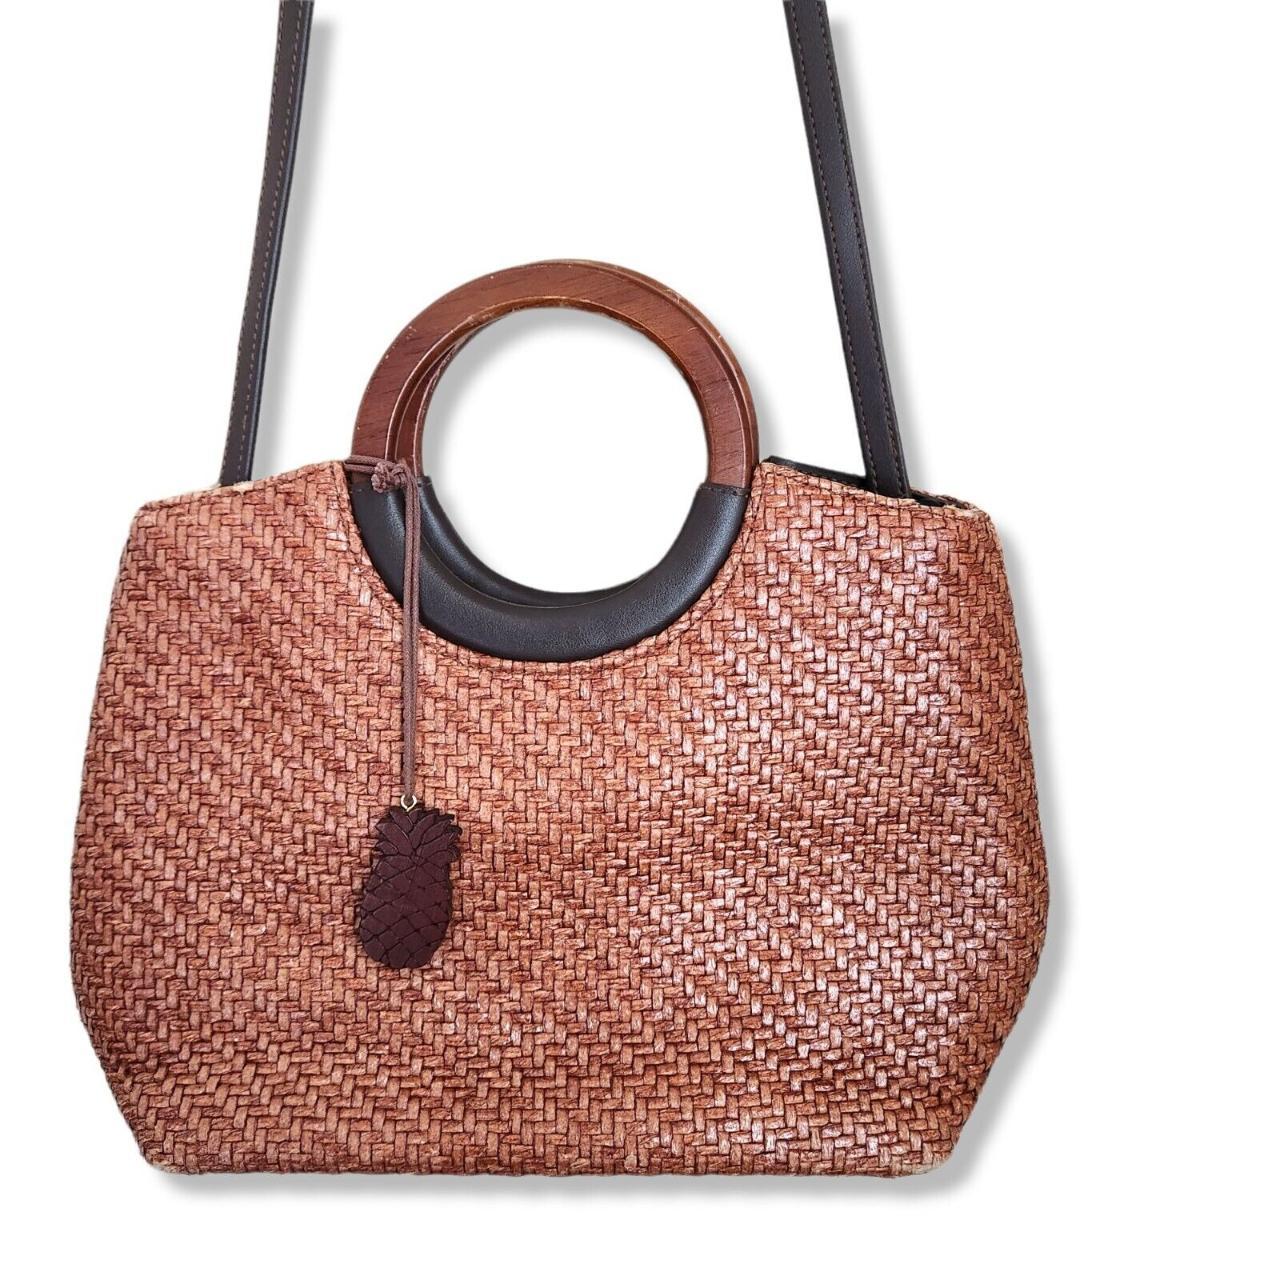 5 Stylish Straw Bags for Summer Under $50